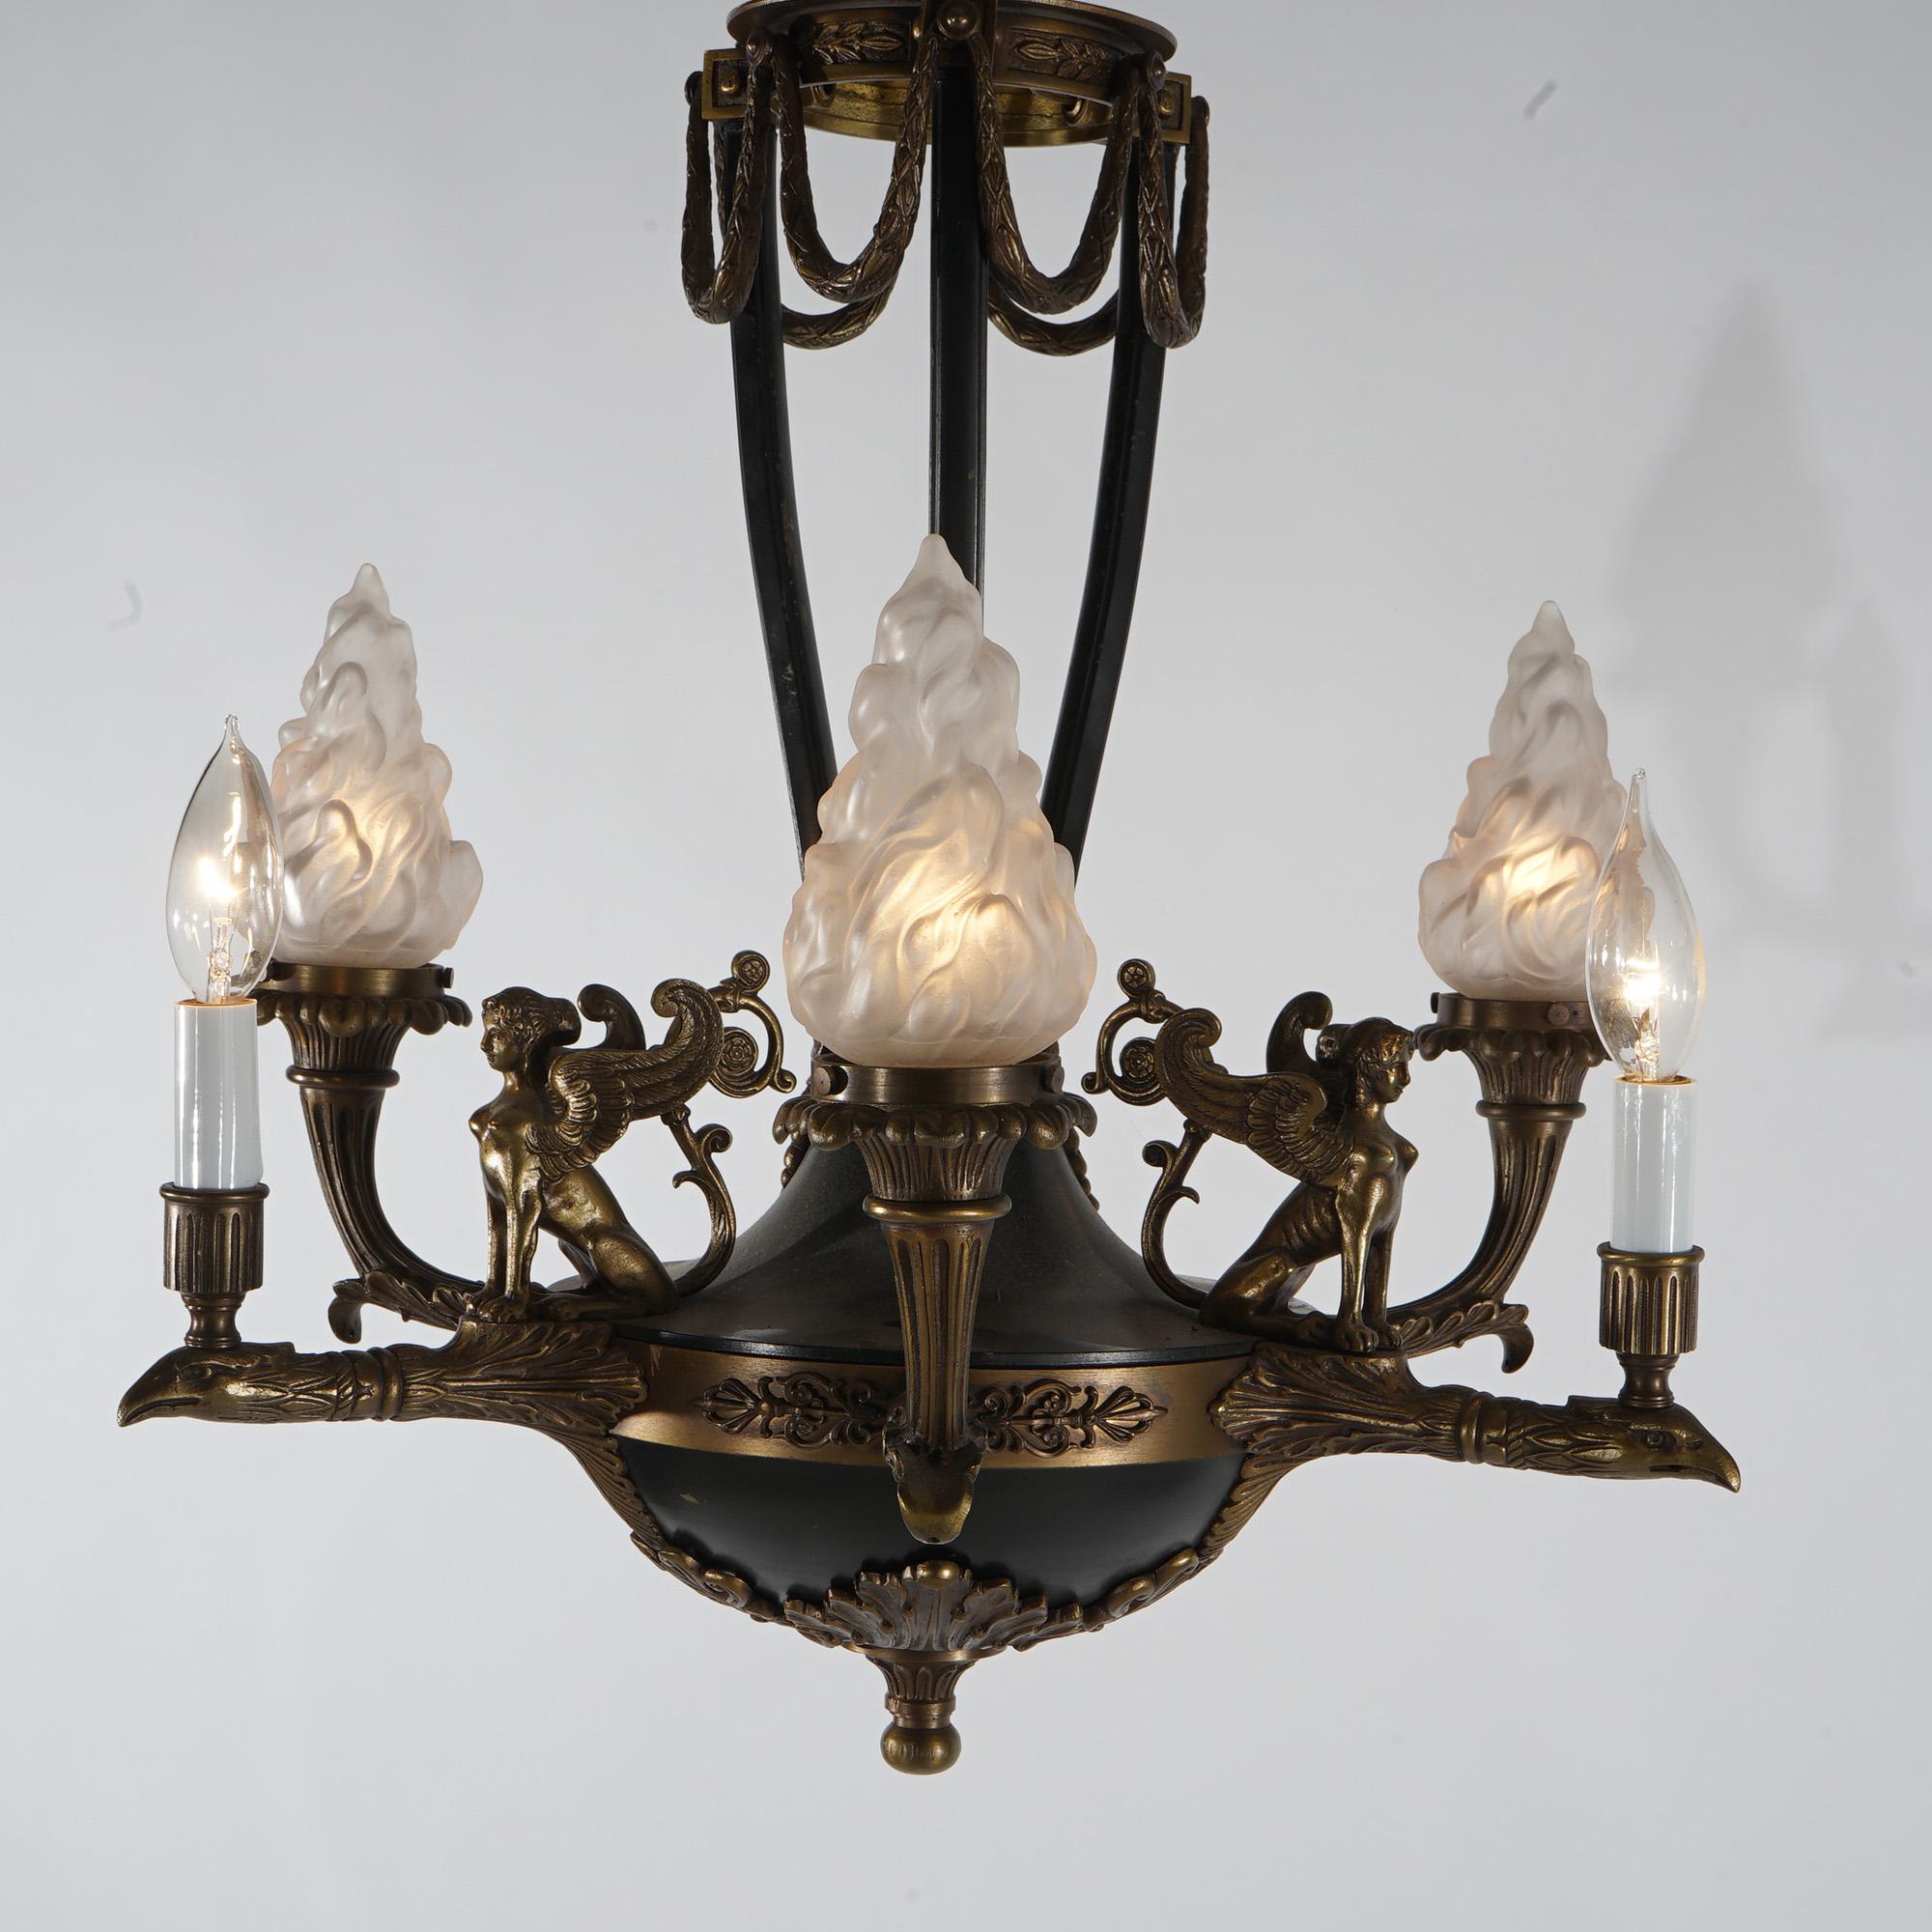 American Antique French Empire Bronzed & Ebonized Figural Sphinx 6-Light Chandelier c1930 For Sale